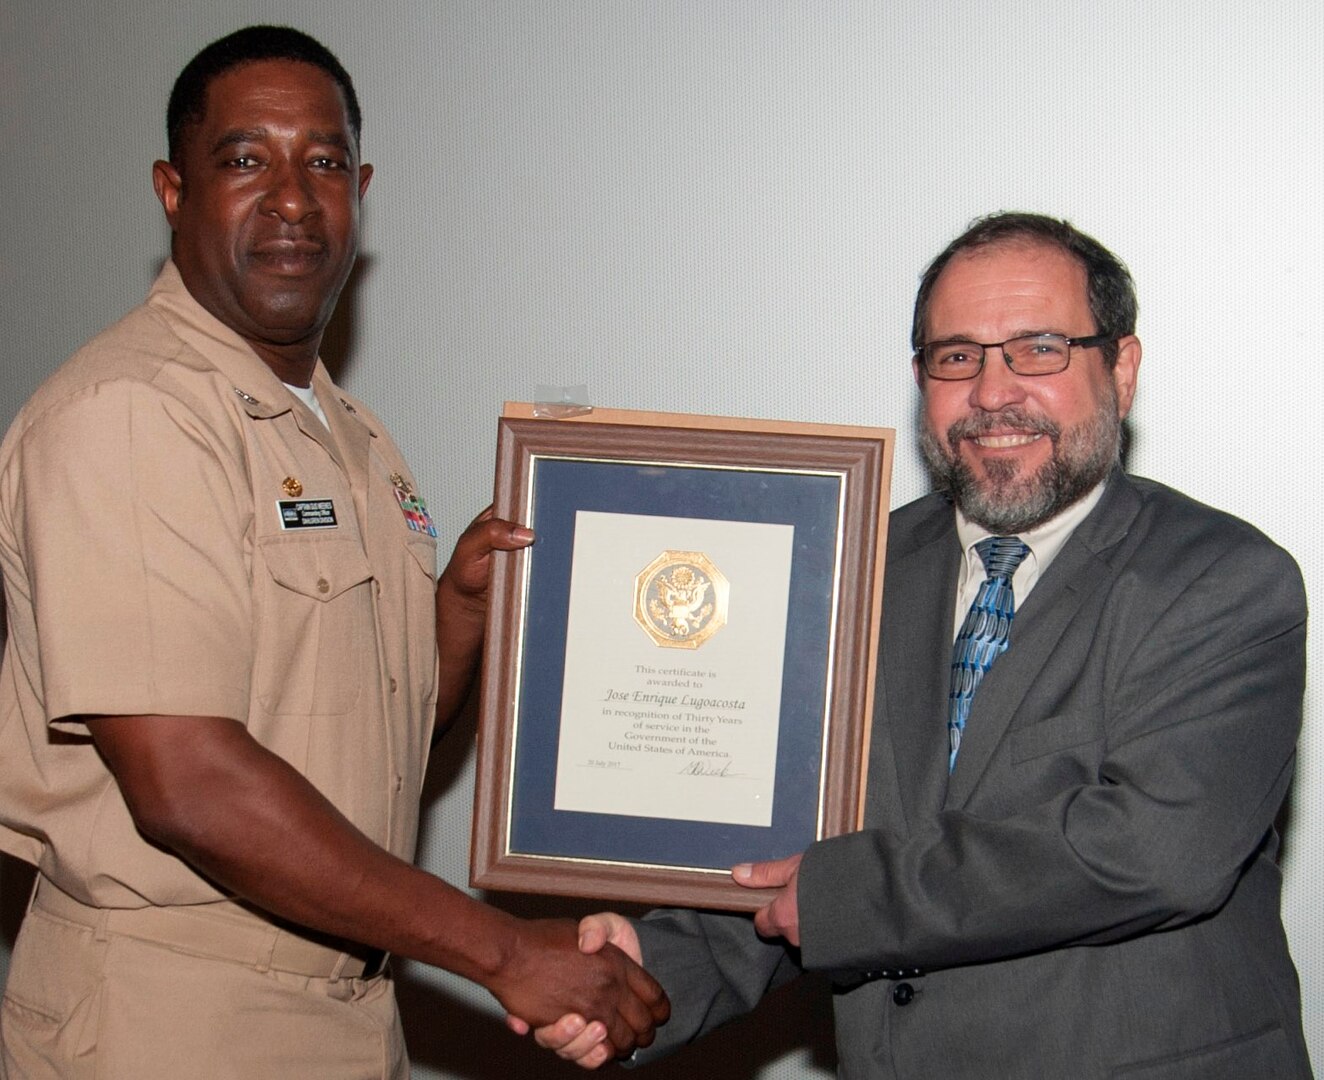 IMAGE: DAHLGREN, Va. (Sept. 28, 2017) - Naval Surface Warfare Center Dahlgren Division (NSWCDD) Commanding Officer Capt. Godfrey 'Gus' Weekes presents NSWCDD senior engineer Jose Lugo with a certificate recognizing Lugo's 30 years of government service before military, government civilians, and defense contractors celebrating Hispanic Heritage Month at the Naval Support Facility Dahlgren theater. "As we celebrate this Heritage Month, I want you all to remember that in order to shape the bright future of America, each one of us has to be a point of light," Lugo told the audience after receiving his certificate. "We have to brighten the day of everybody around us and we have to inspire those who follow us, and in doing so we will improve our future."  At this year's event, personnel from NSF Dahlgren and tenant commands gathered at the base theater to join the Navy and nation while celebrating and reflecting on the theme "Shaping the Bright Future of America."